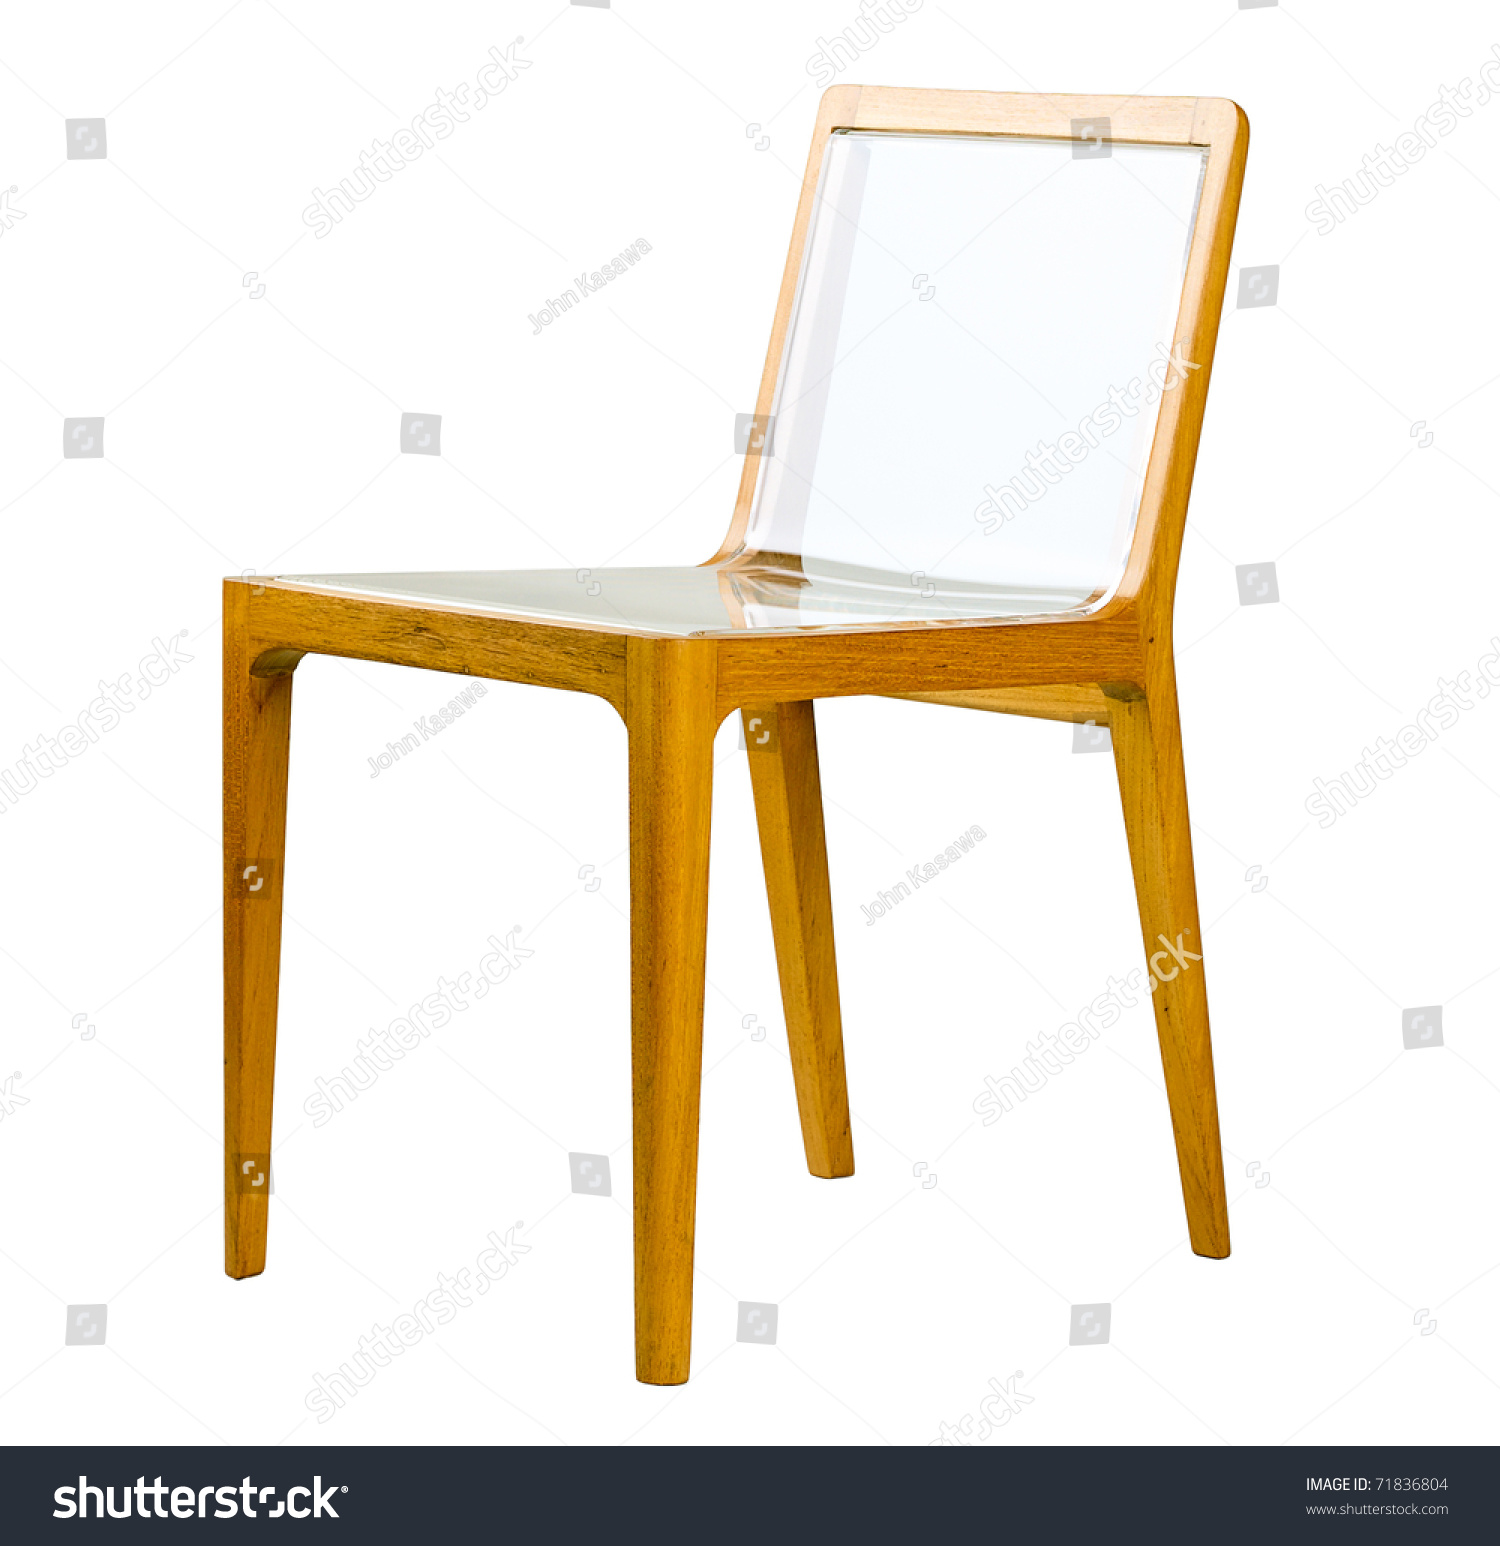 Acrylic Seat Wooden Can Make Modern Royalty Free Stock Image